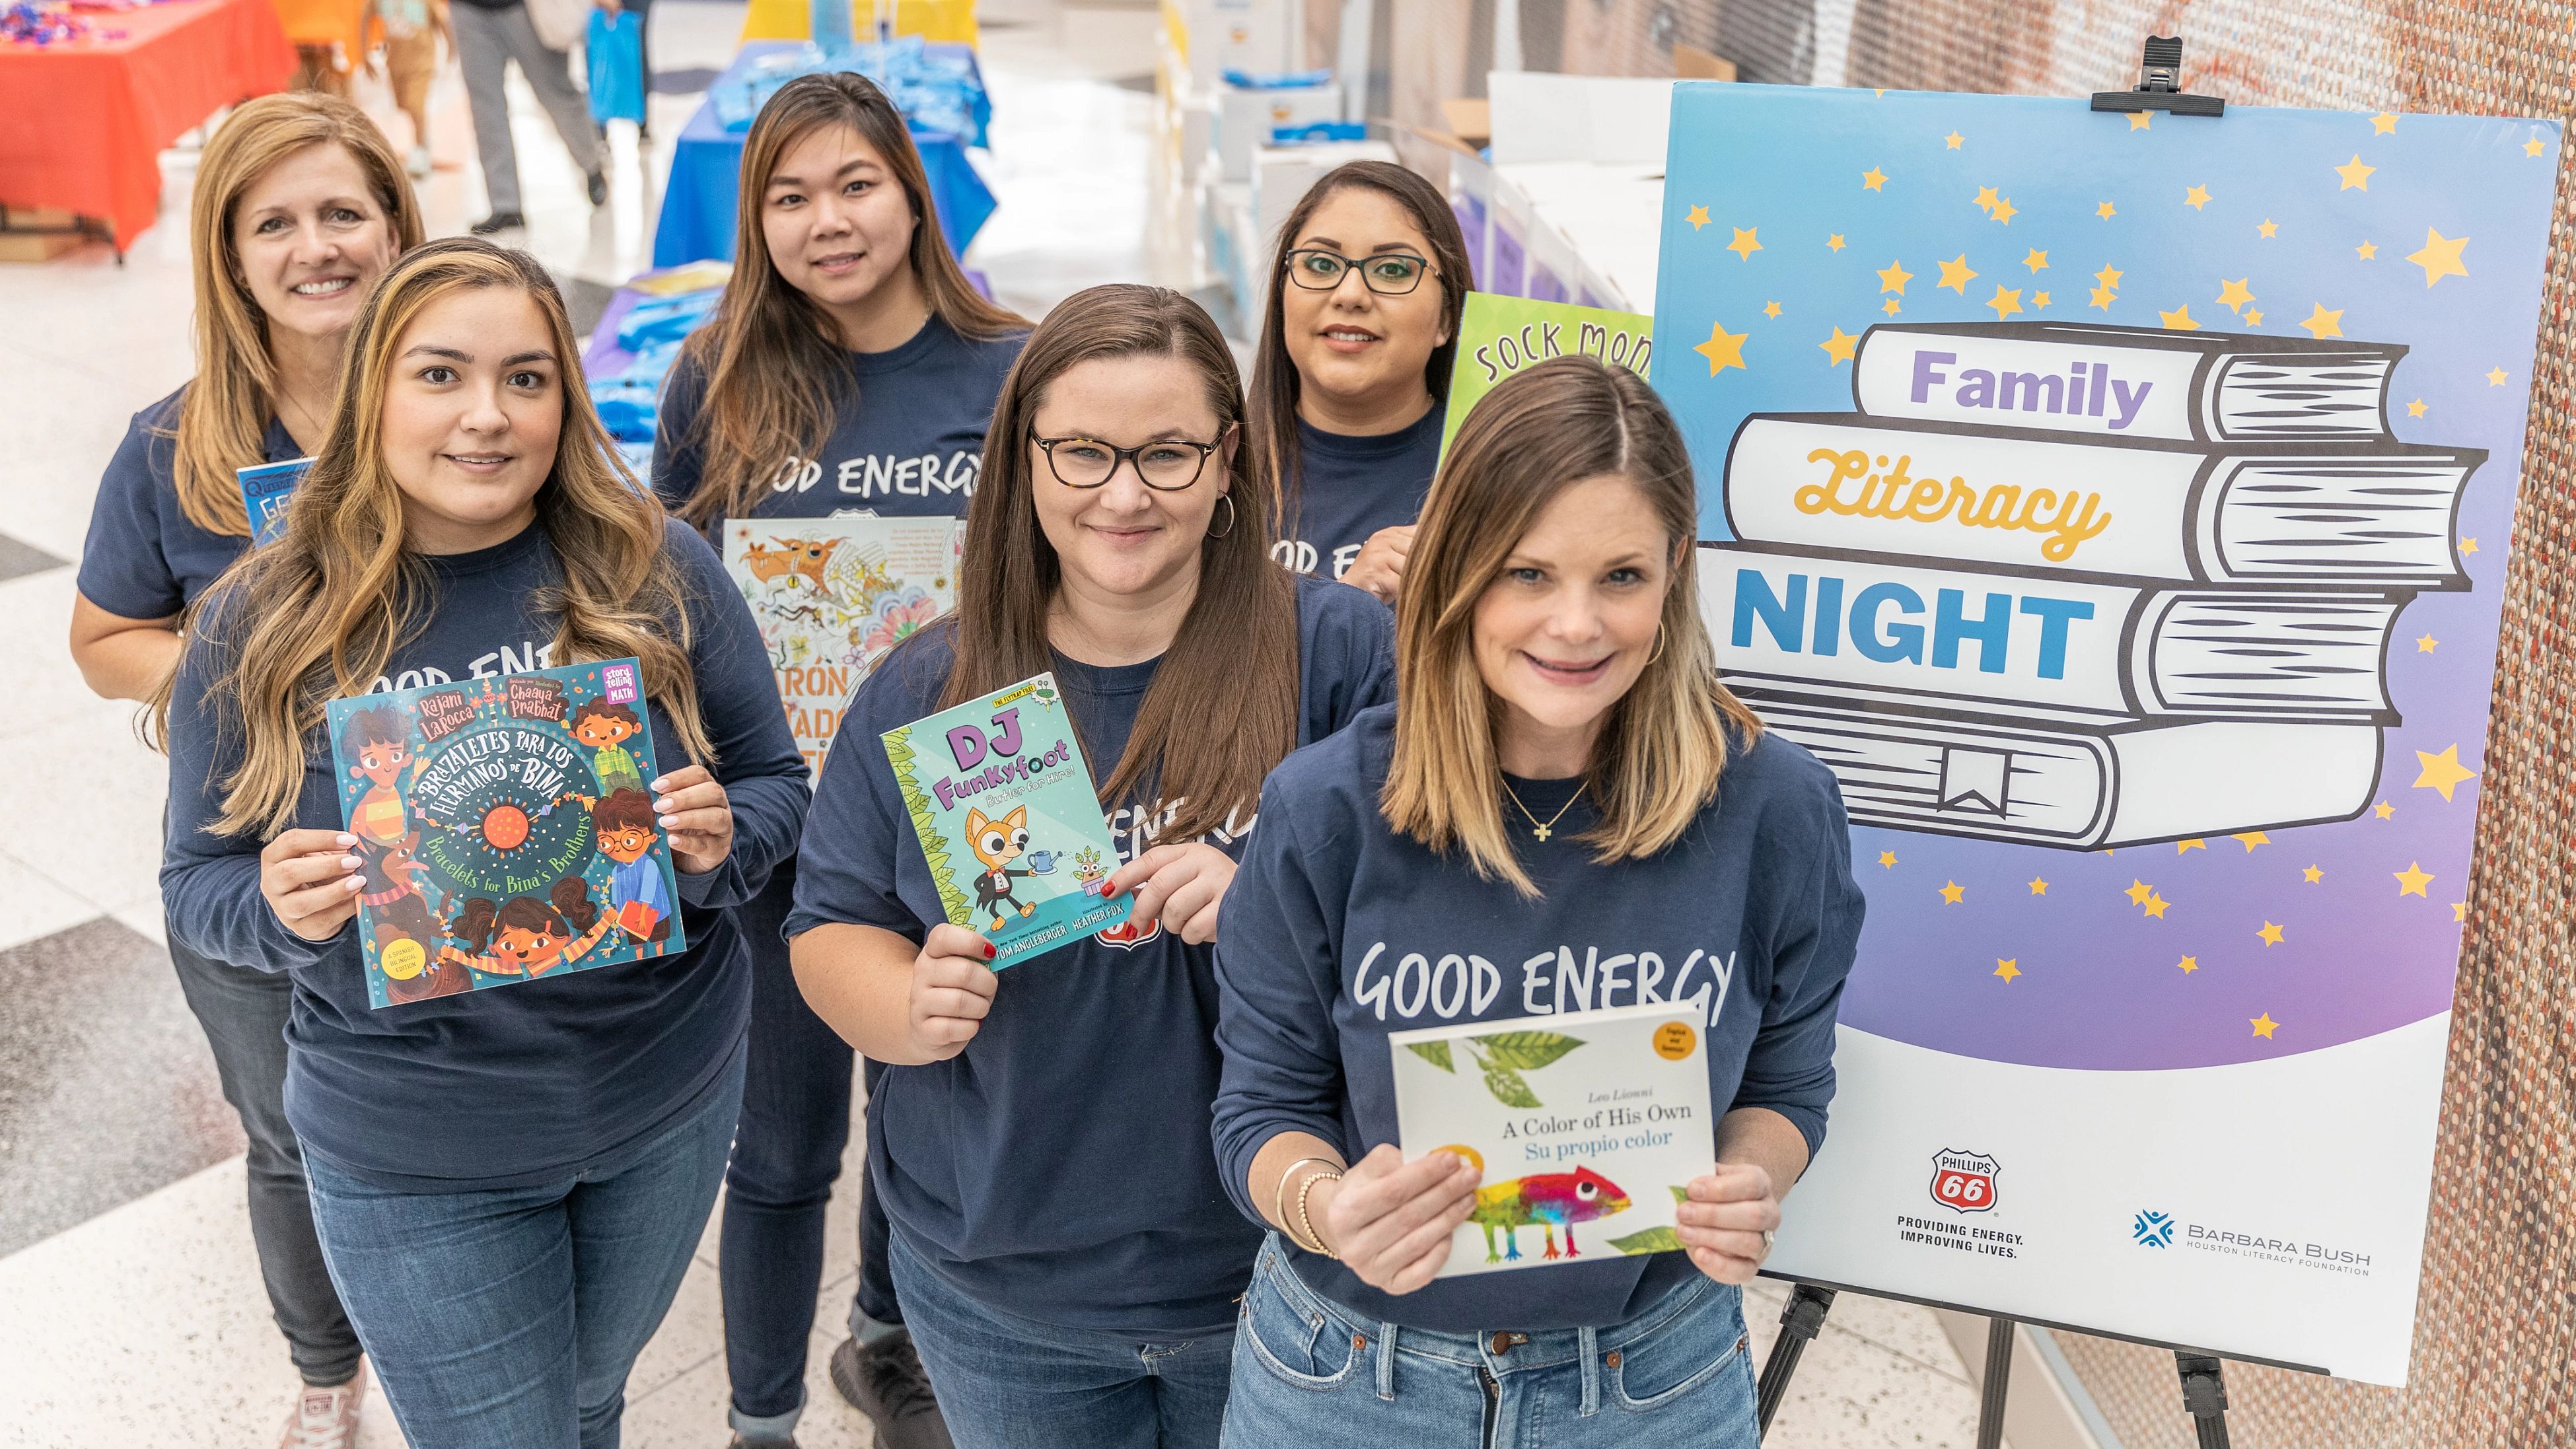 Volunteer at the Barbara Bush Literacy night at the Children's Museum of Houston, where Phillips 66 donated mini-libraries to all children at the free family night.